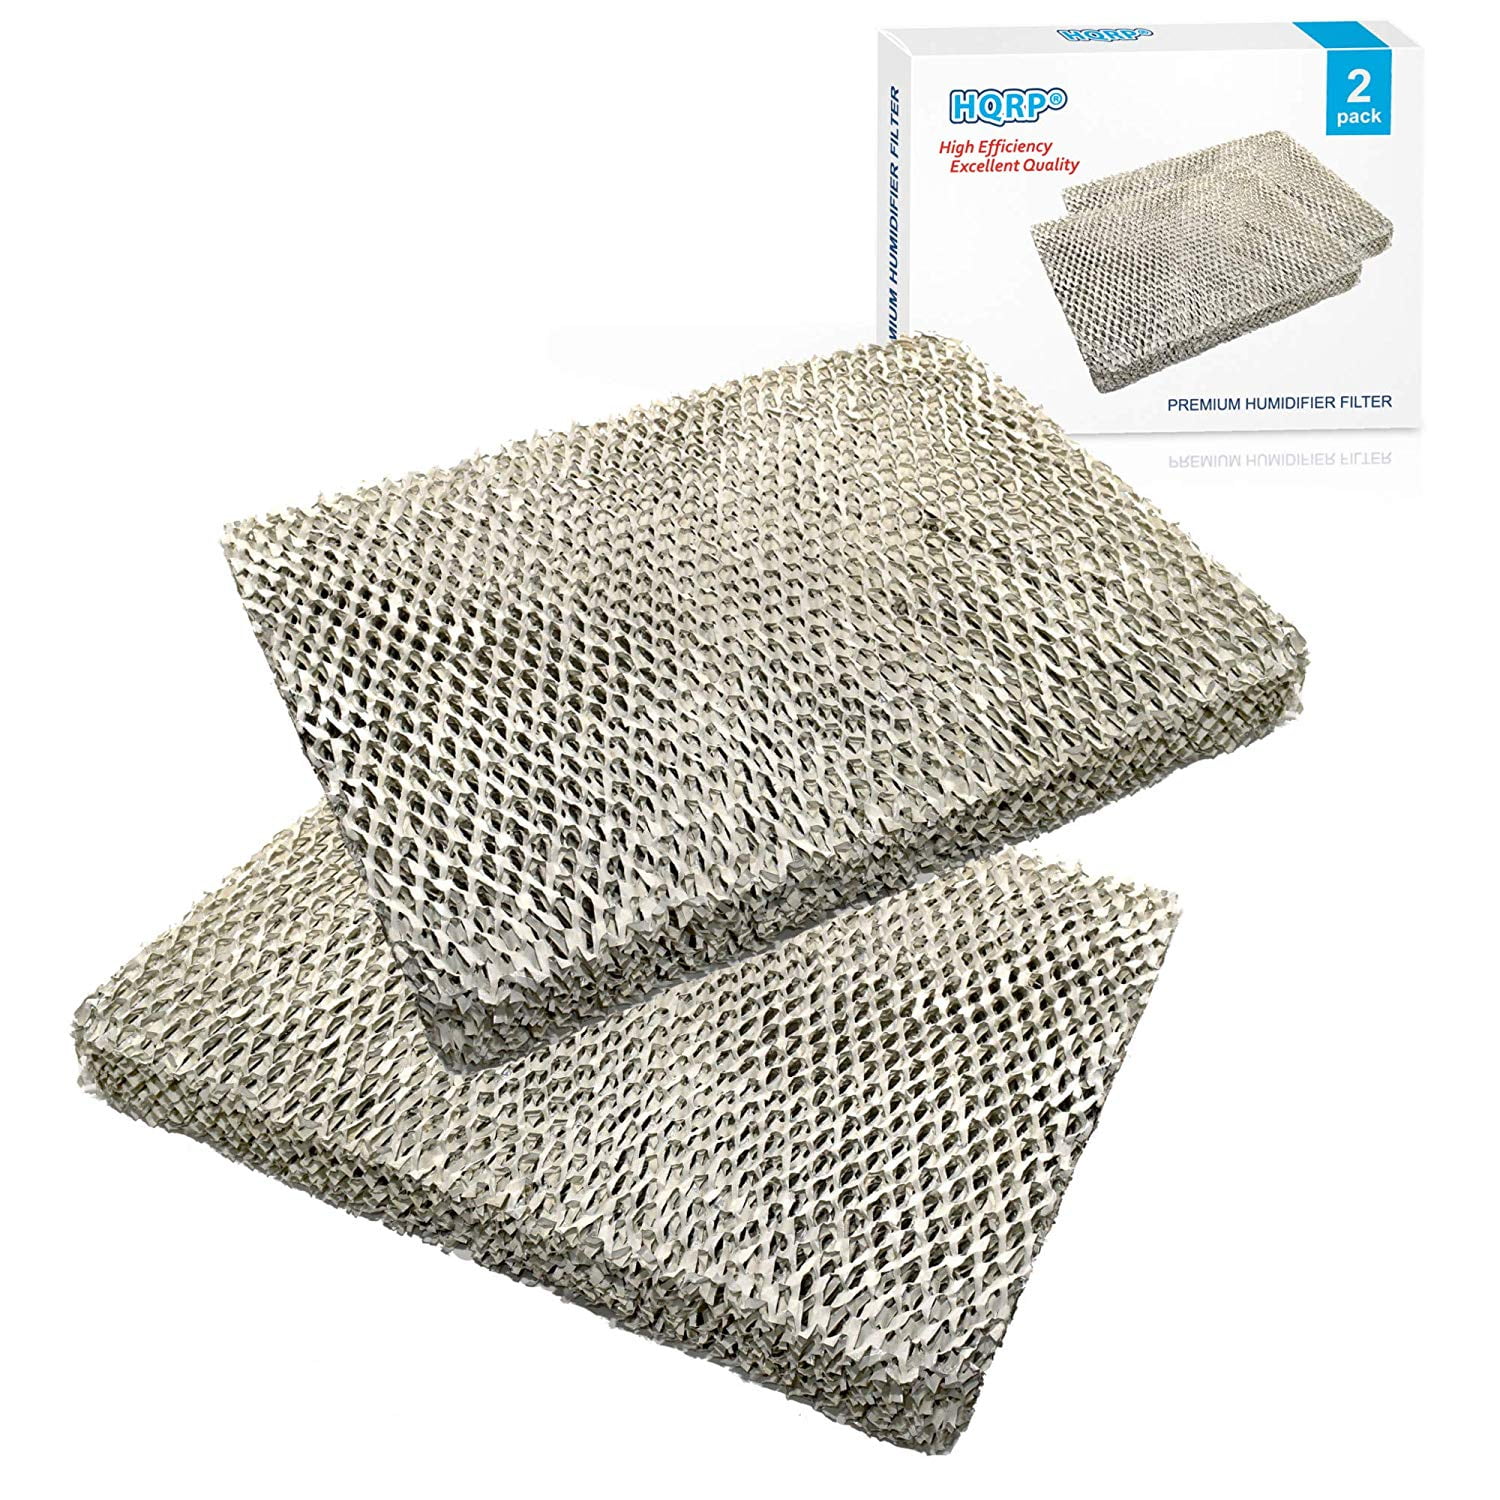 Humidifier Filter for Aprilaire 600 High Efficiency  6 Pack 